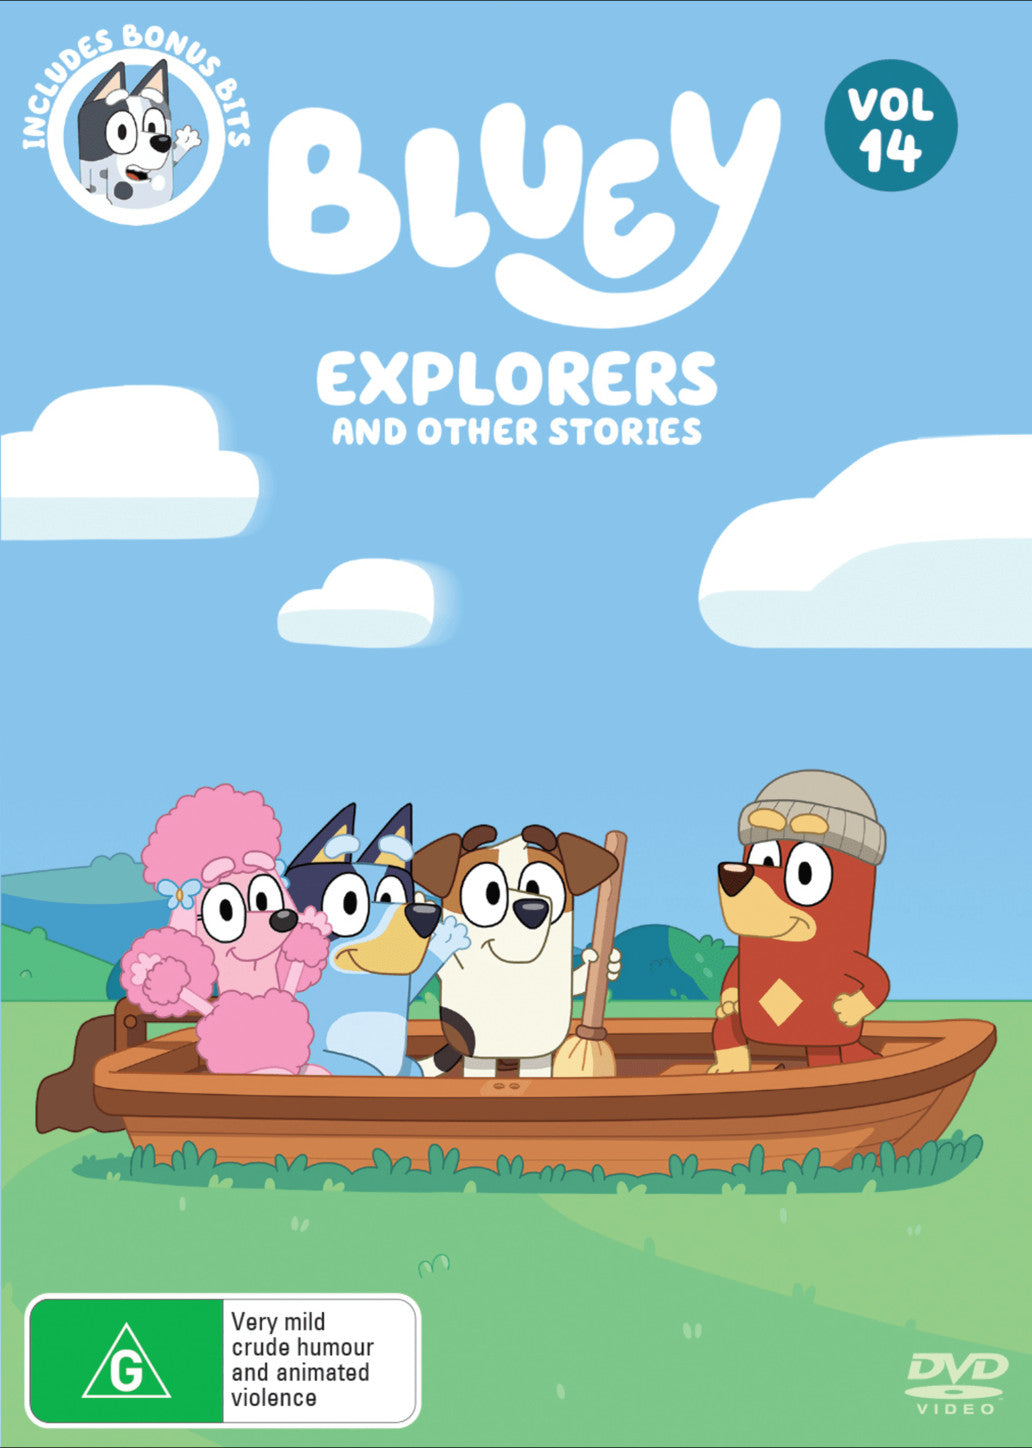 BLUEY: EXPLORERS AND OTHER STORIES (VOL 14)